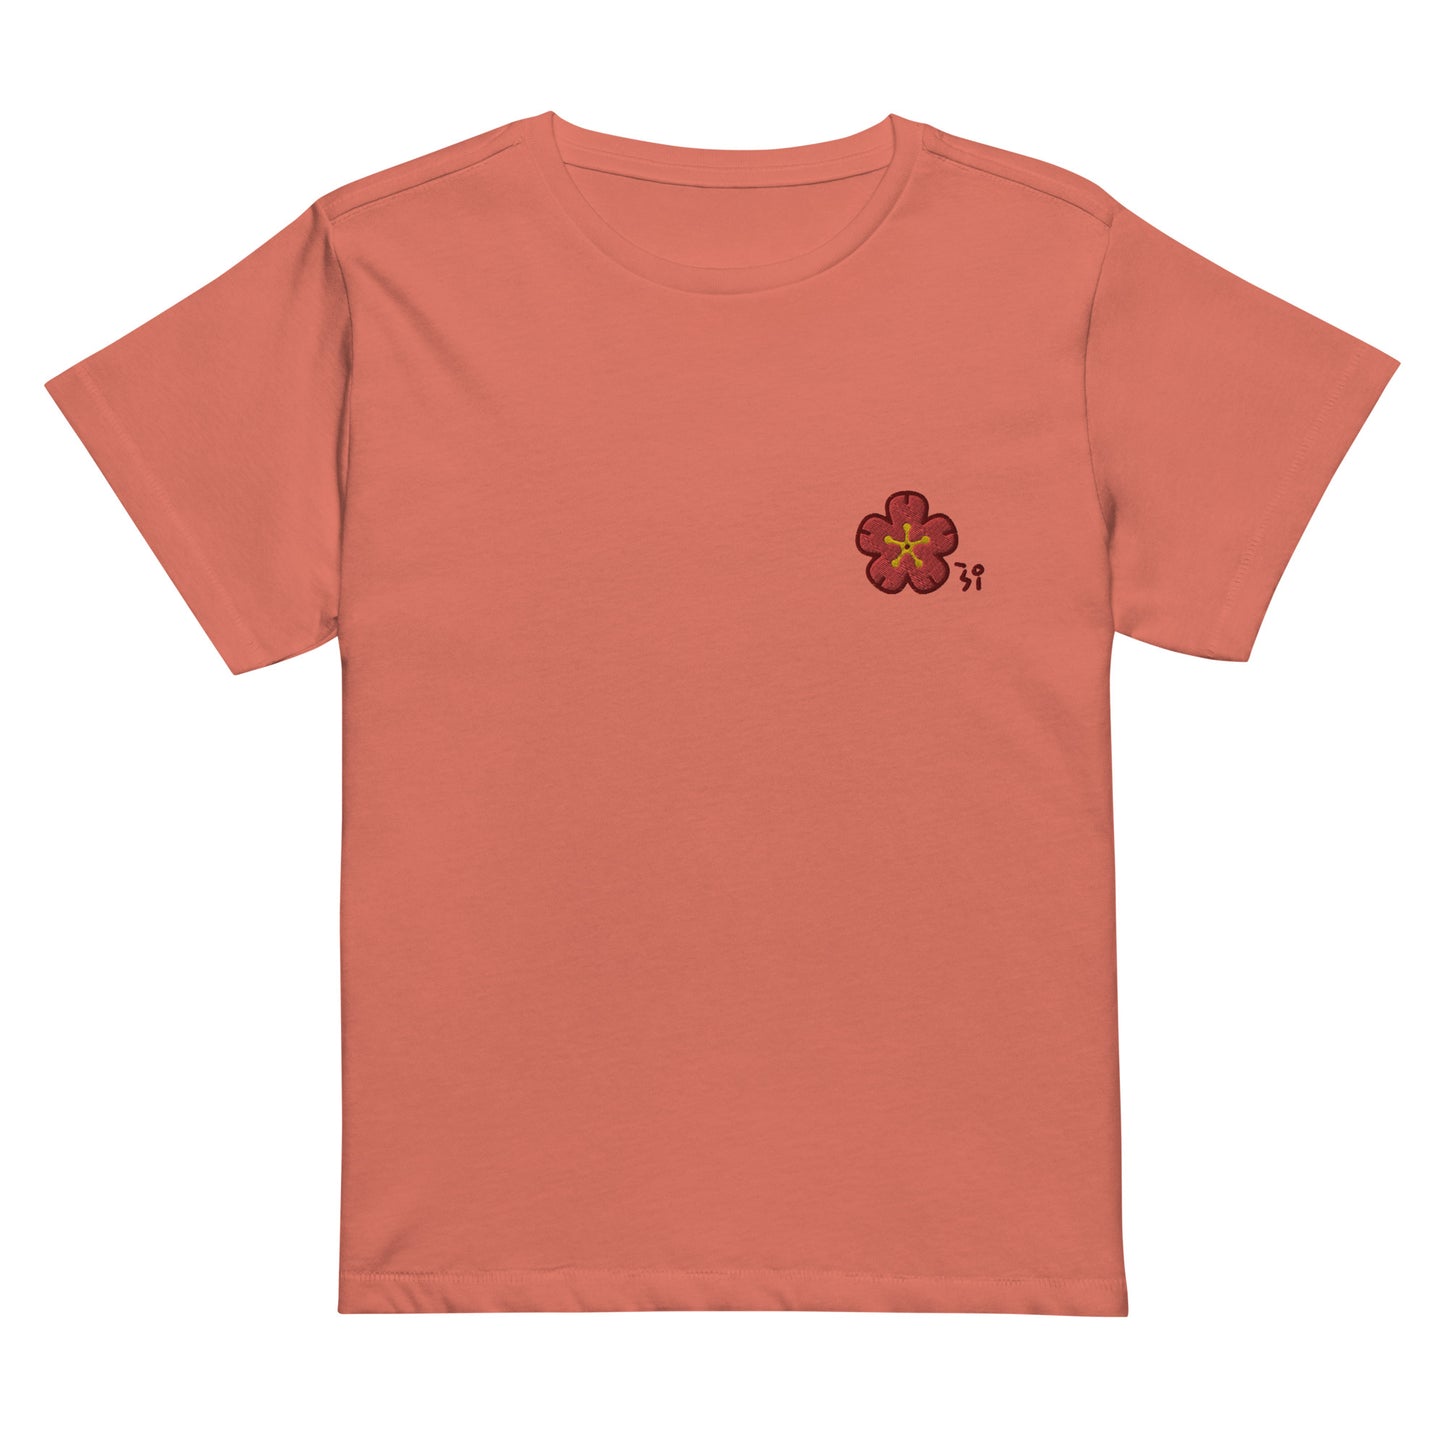 Chinese quince Women’s high-waisted t-shirt